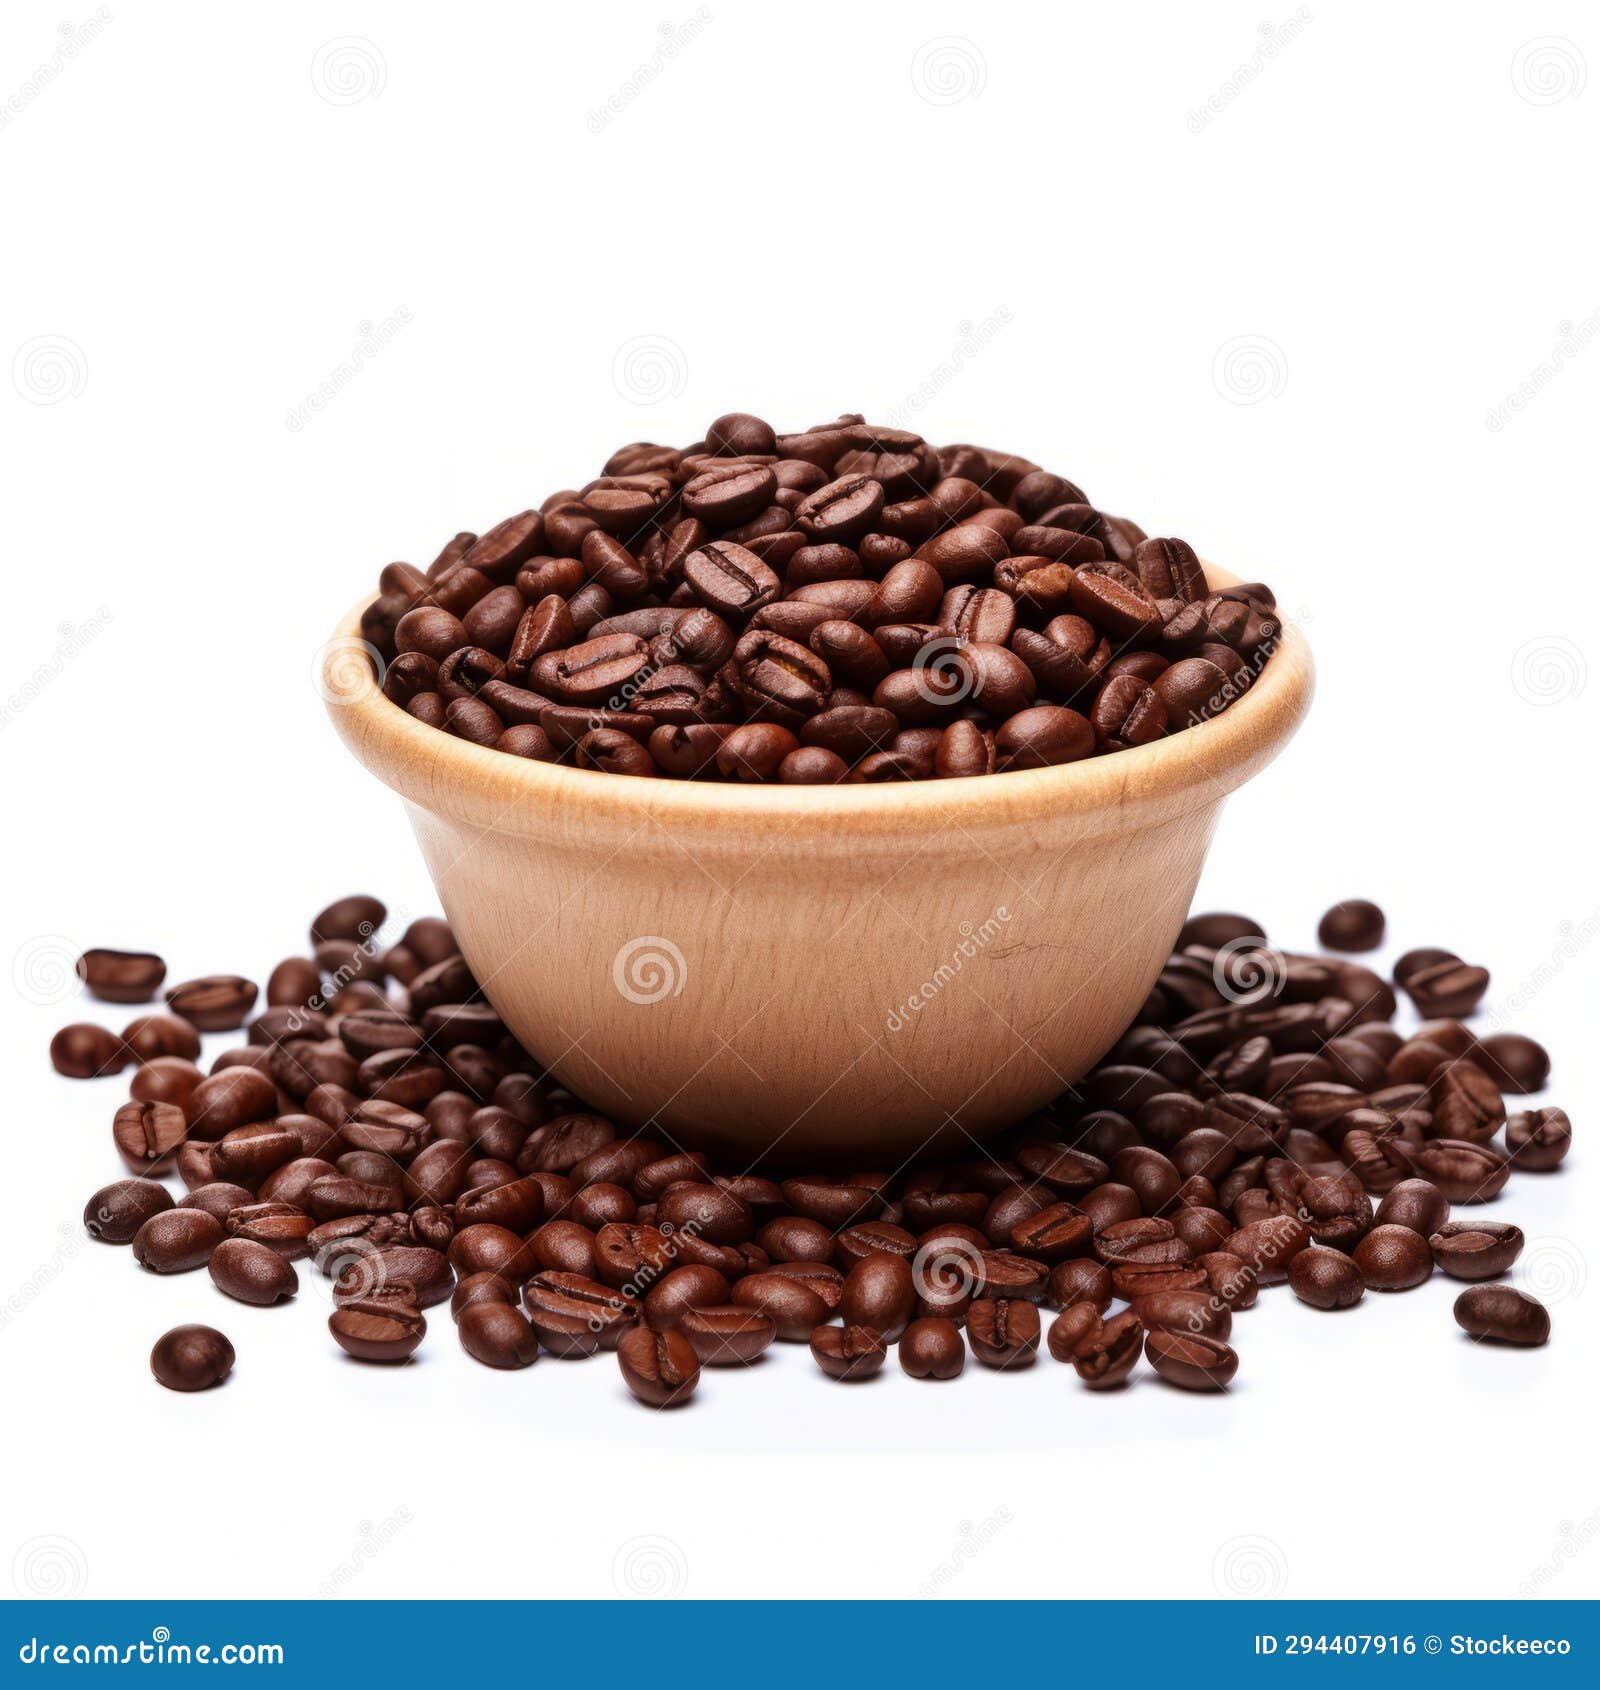 kenyan aa coffee beans in wooden bowl on white background